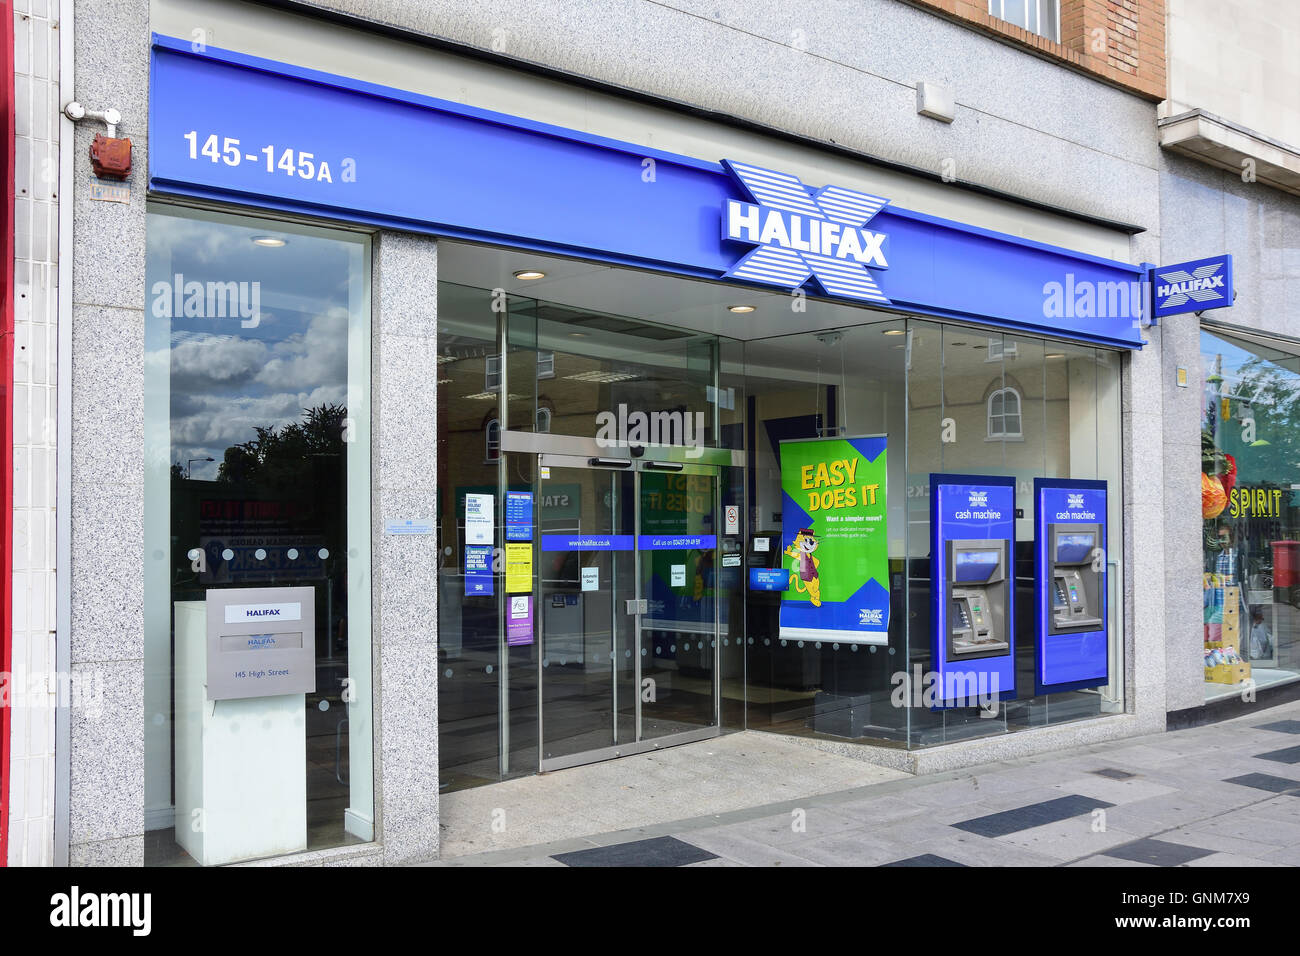 Halifax Bank, Slough High Street, Slough, Berkshire, Angleterre, Royaume-Uni Banque D'Images